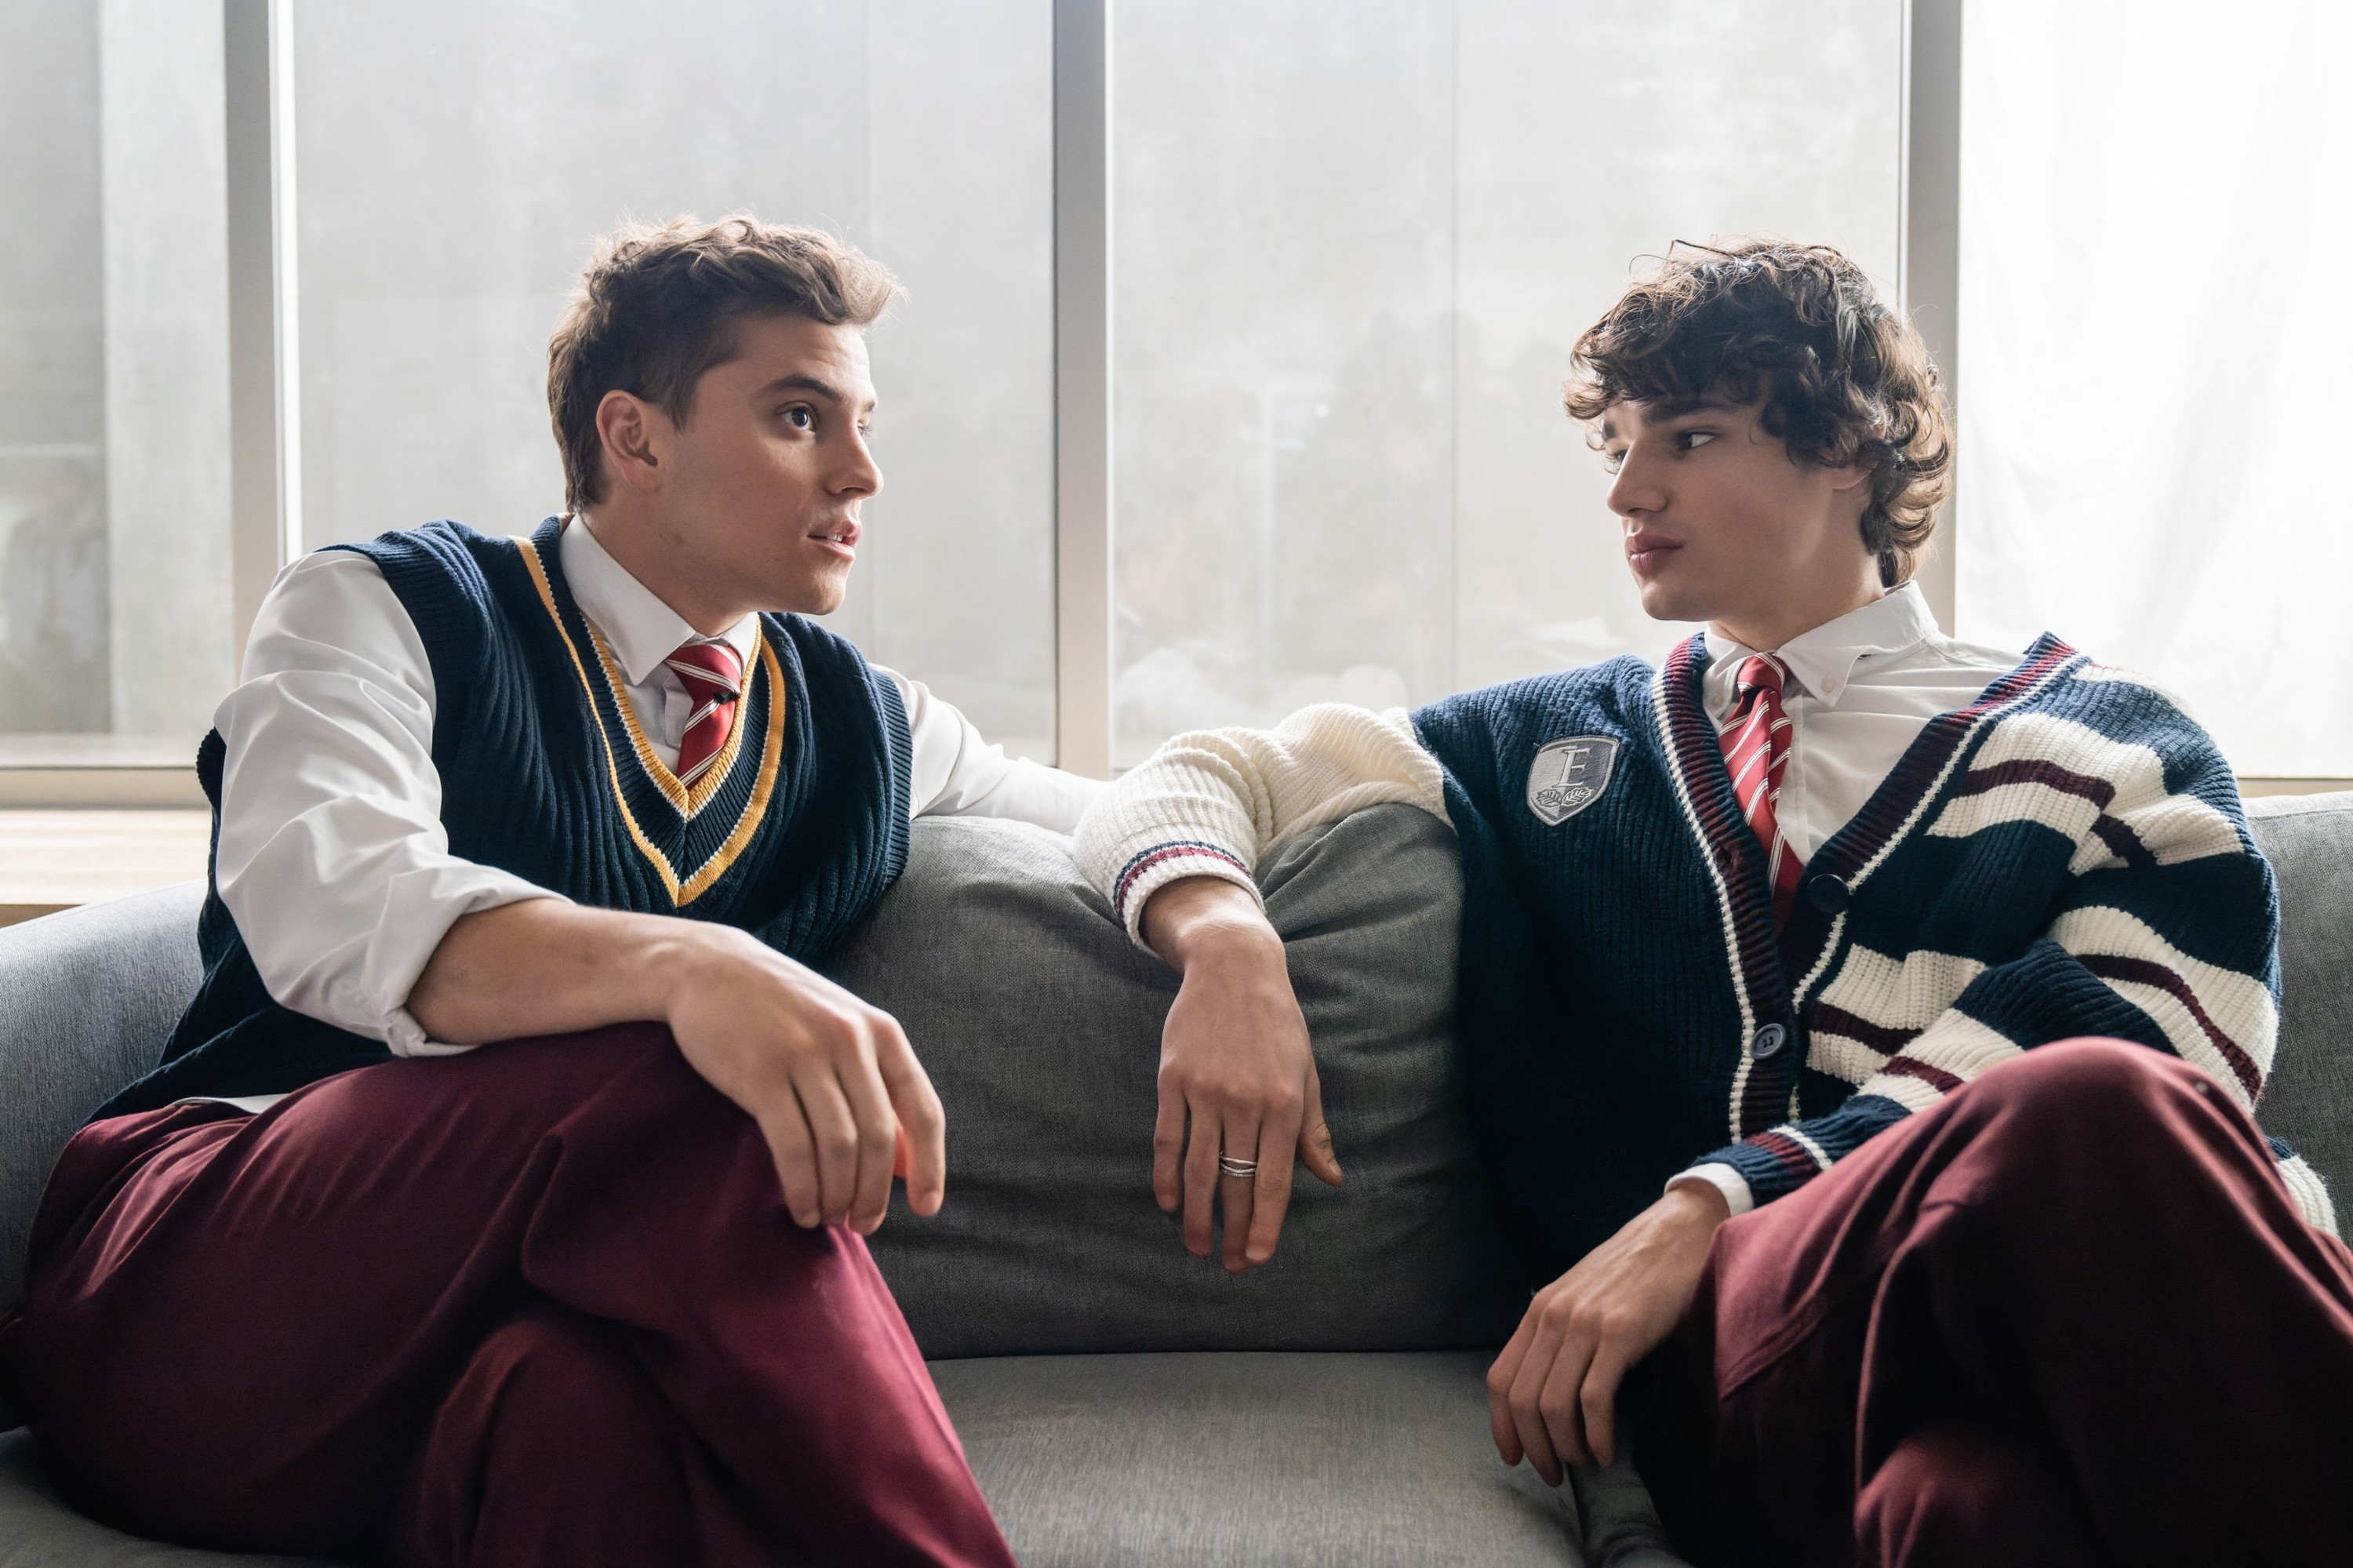 Two actors in preppy outfits sitting on a couch, engaging in a conversation for a TV show scene